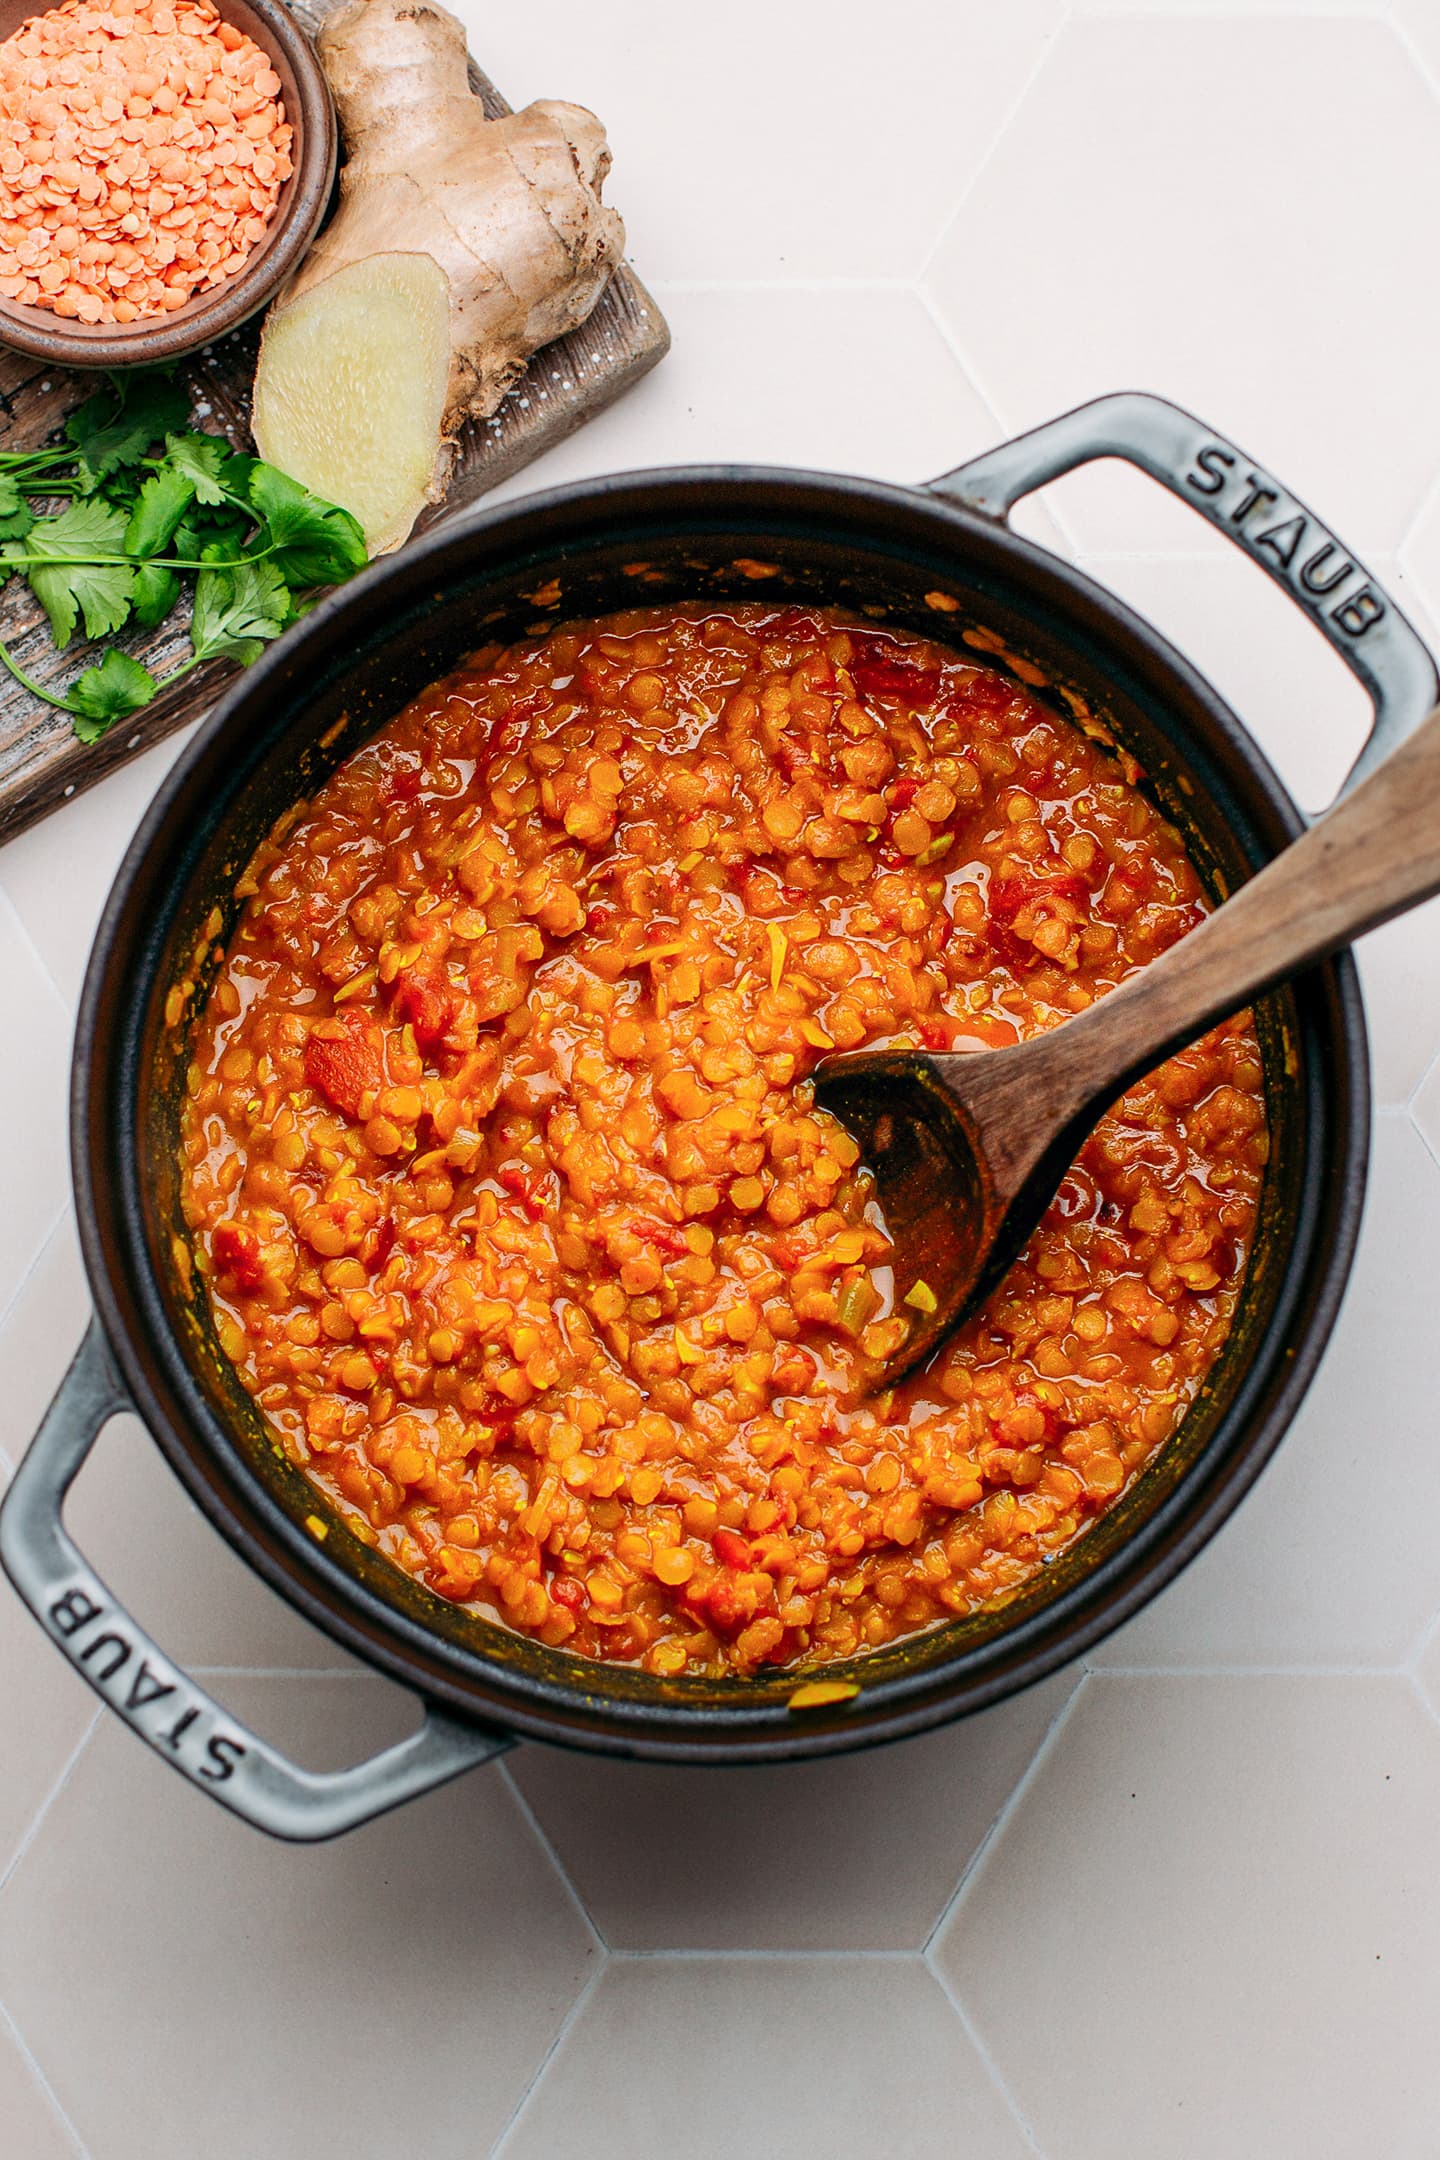 Cooked red lentils in a pot.